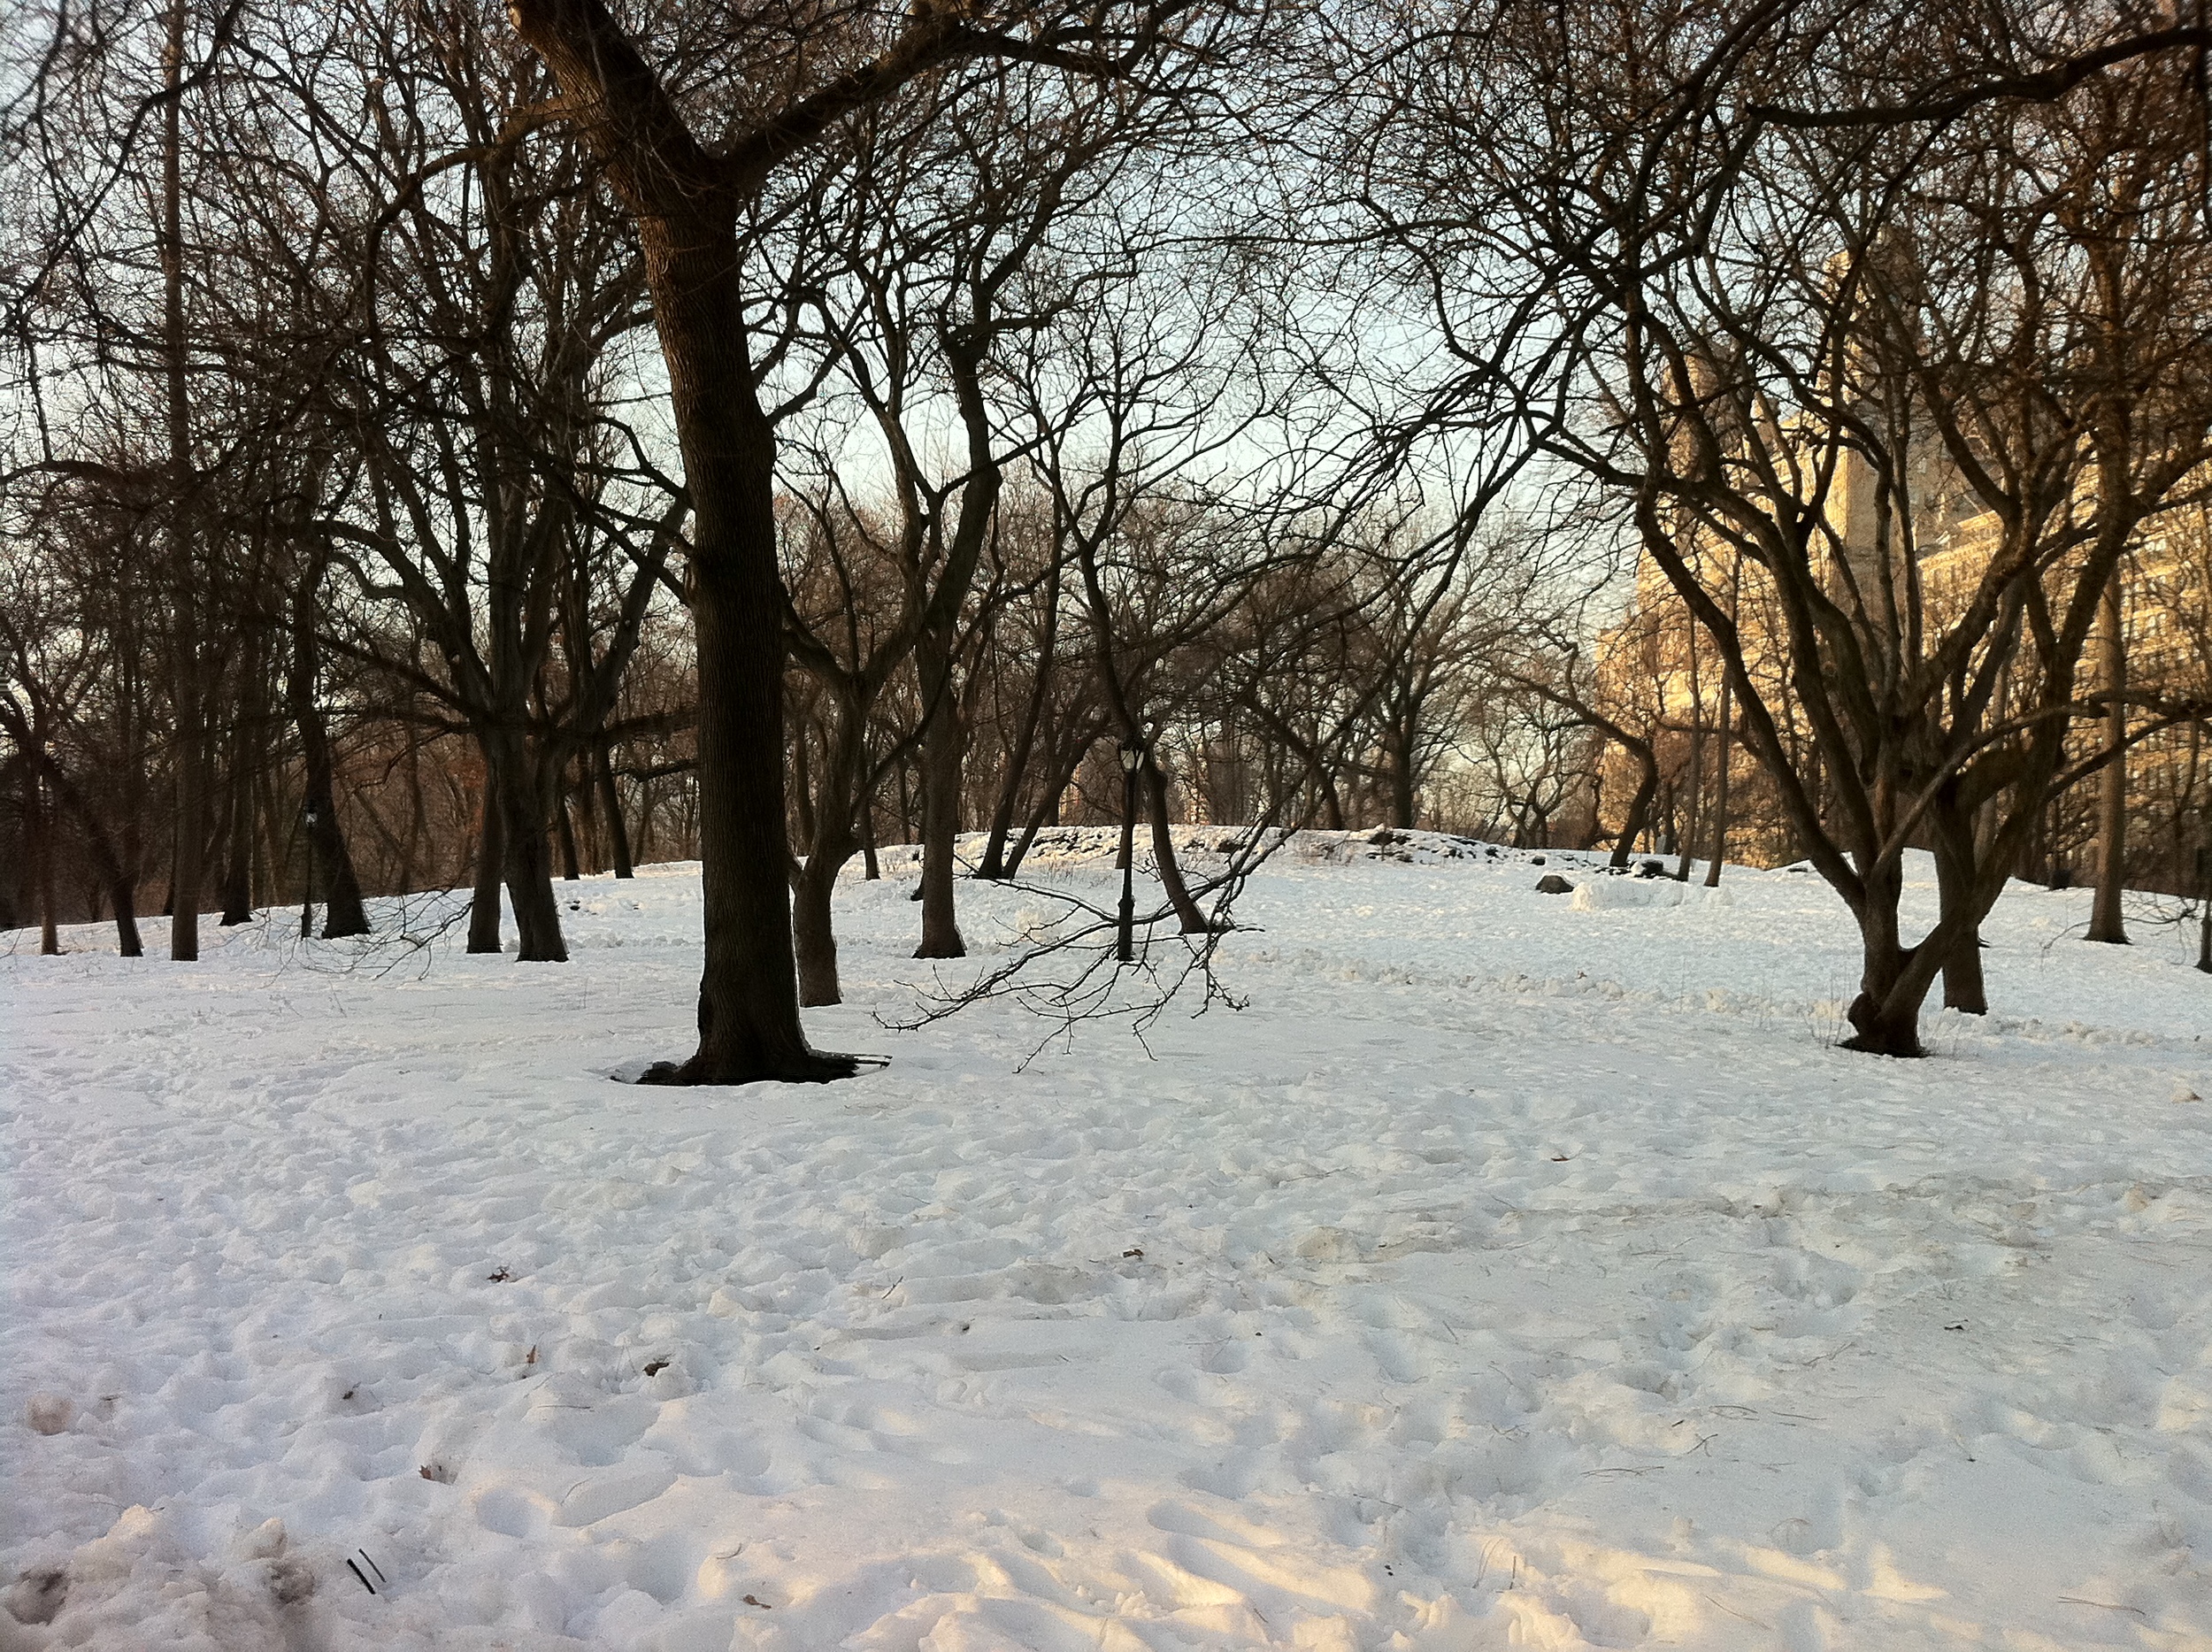 New Year's Day in New York - Central Park